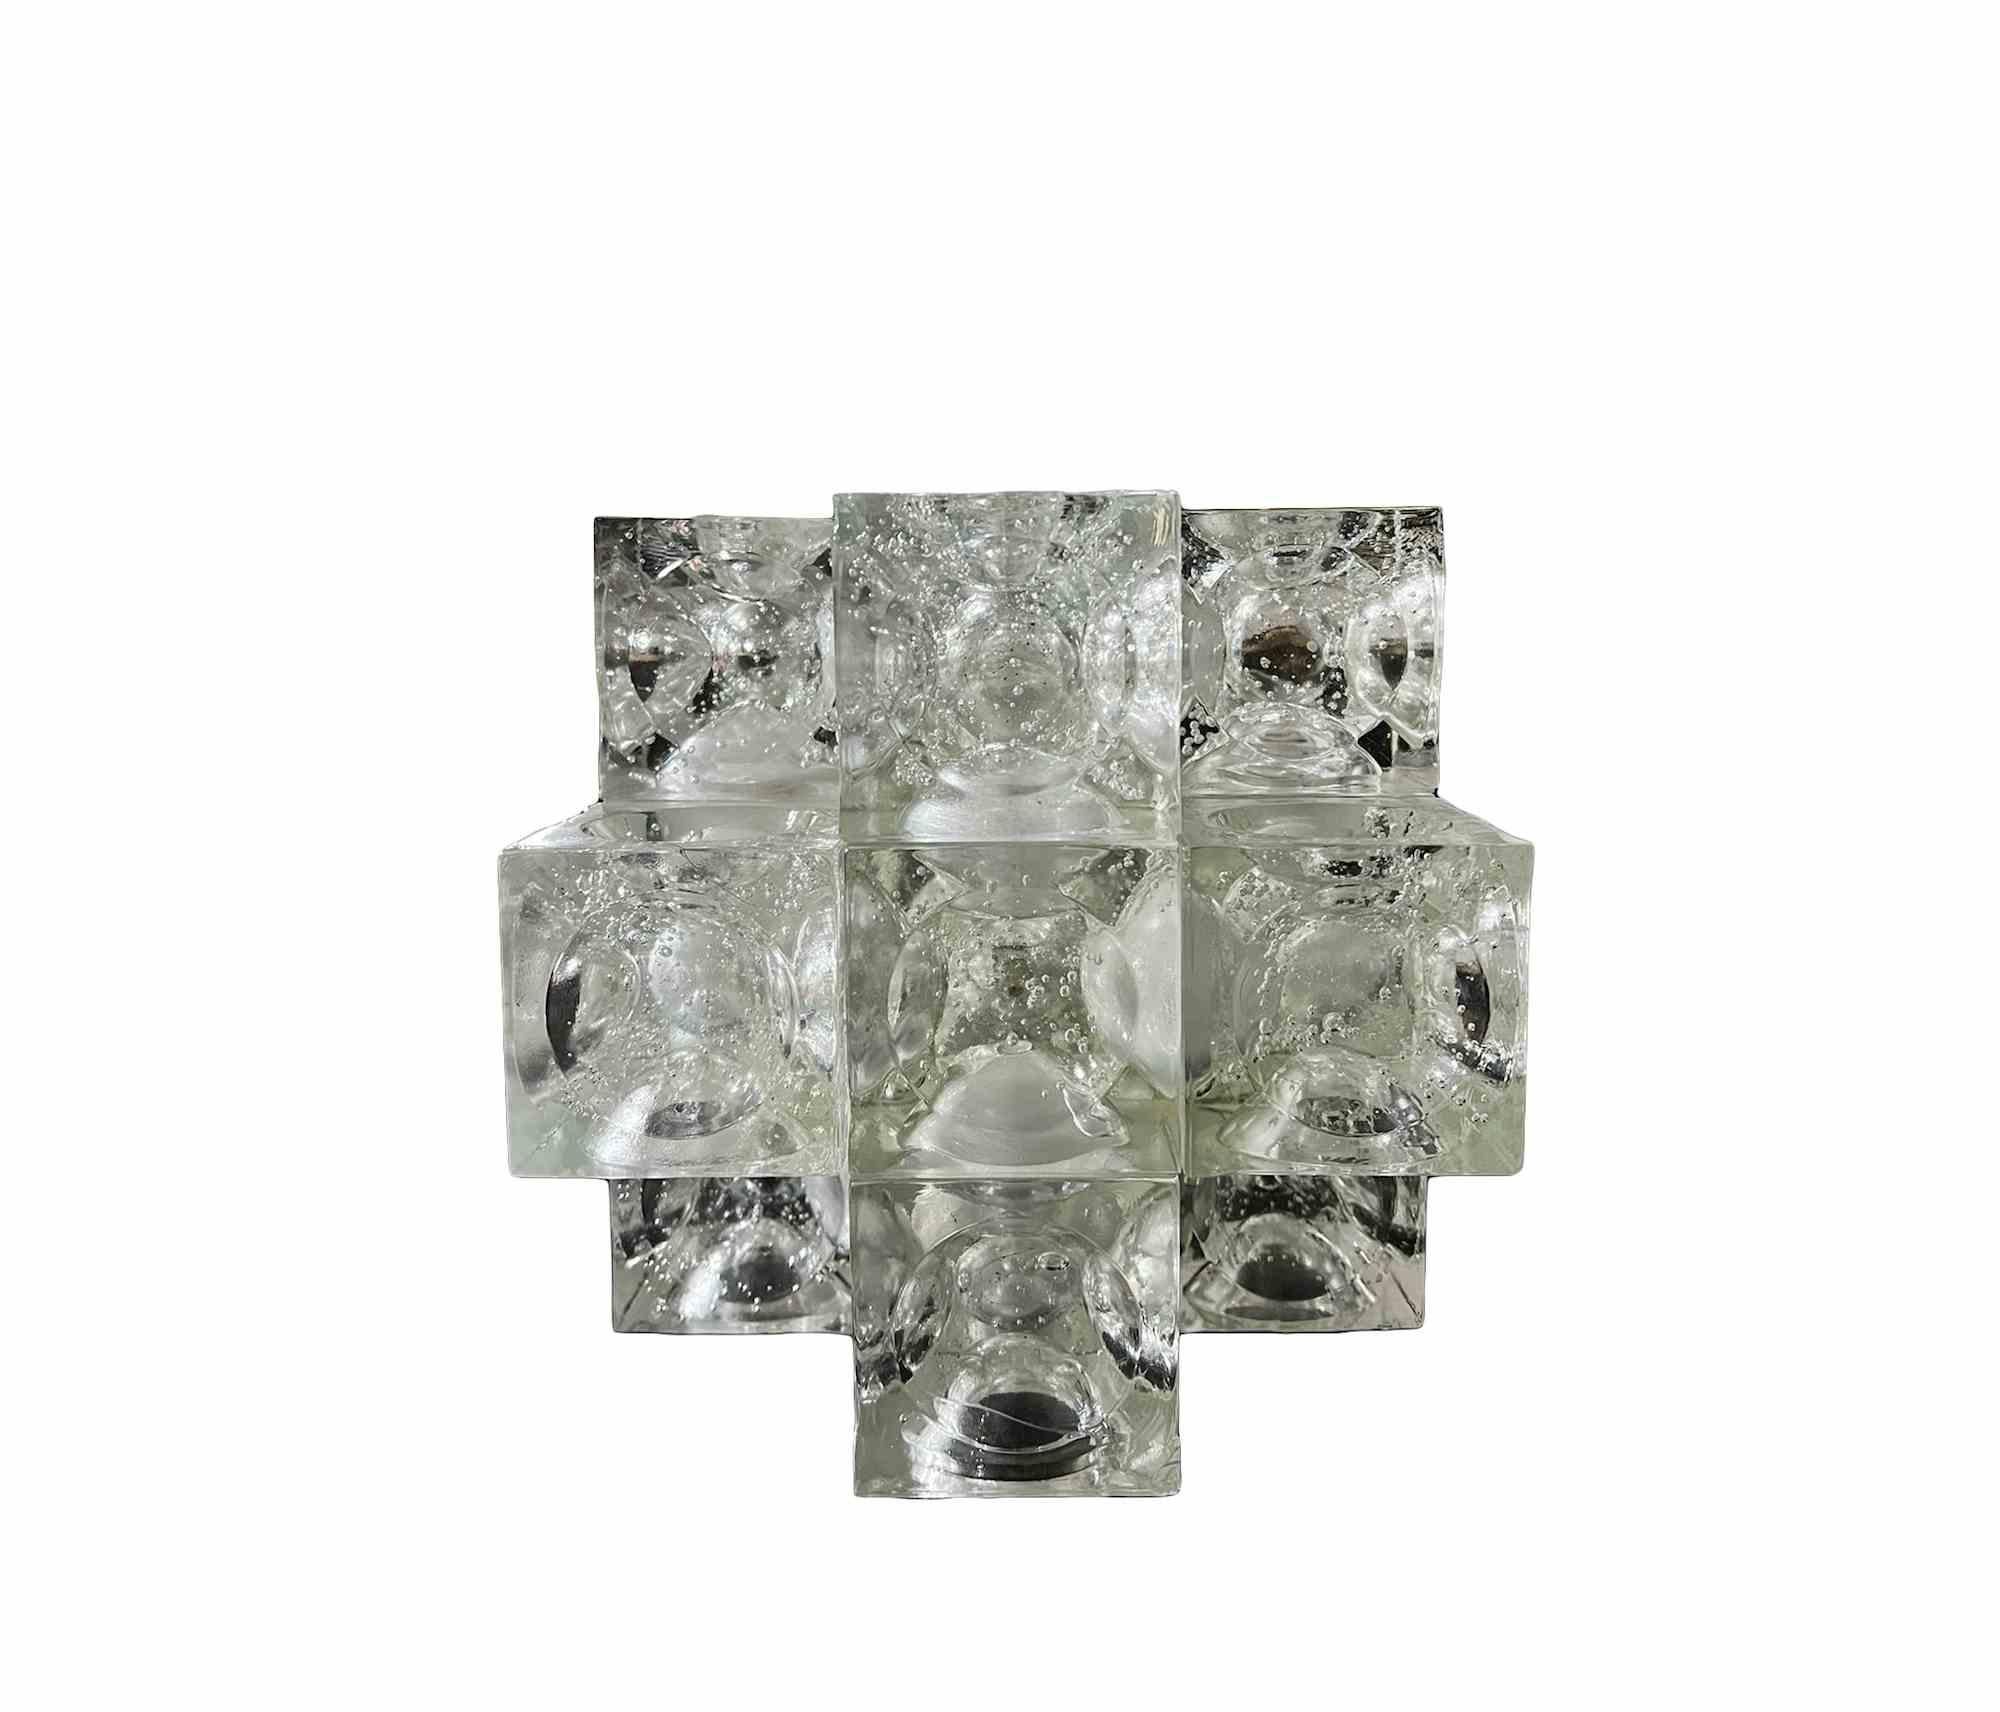 Italian Poliarte Adjustable Cubes Lamp by Albano Poli for Poliarte, Italy, circa 1970s For Sale